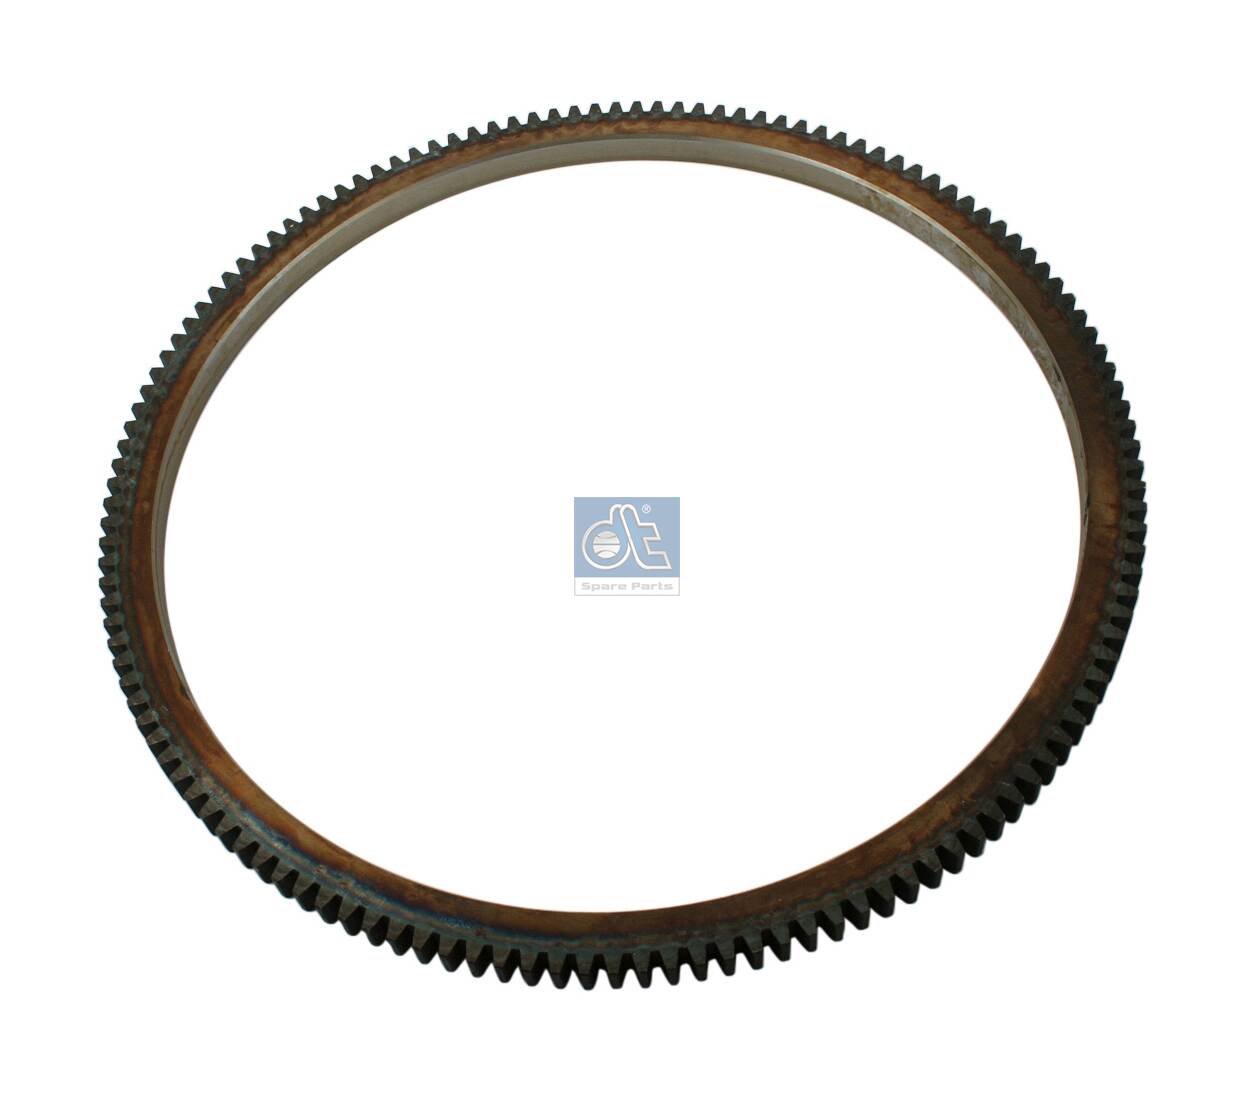 4.61627, Ring Gear, flywheel, DT Spare Parts, 3520320105, 3520320605, 3520321305, A3520320105, A3520320605, A3520321305, 010331352001, 02.01.03.200388, 0340030050, 04105003, 08.160.1001.030, 123.206, 13088, 20090335203, 310760, 45748, 58412, 02.01.03.219754, 04105004, 08.160.1001.550, 20090335205, 08.160.S9960000, 20.0903.35203, 203.077, 45.33.0008, 45.33.0008L, 45.33.1008, 45-33-0008, 45330008A, T75655